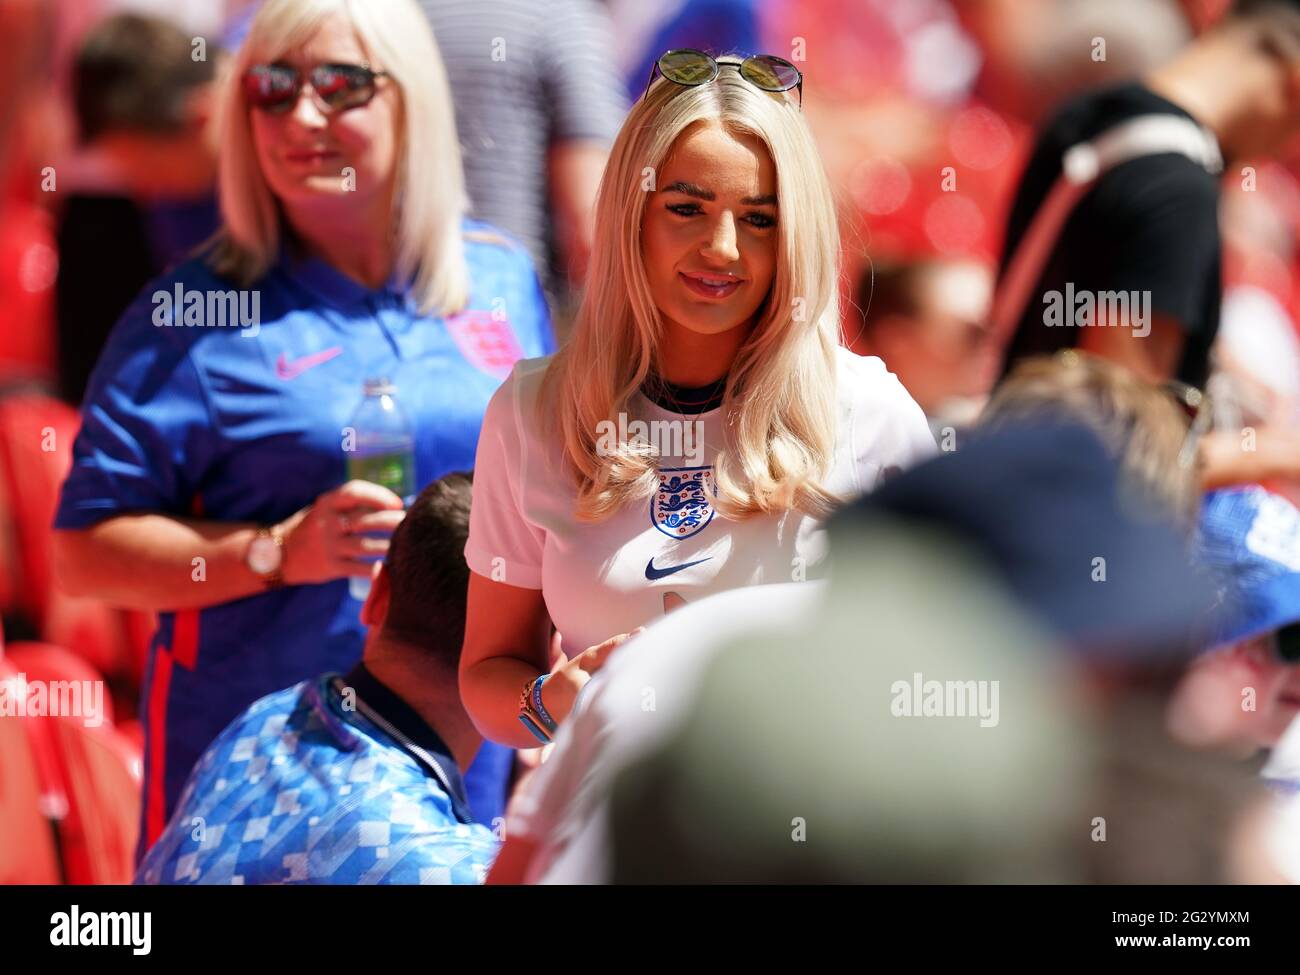 Jordan Pickford's wife Megan Davison in the stands during the UEFA Euro 2020 D match Wembley Stadium, London. Picture date: Sunday June 13, 2021 Stock Photo - Alamy